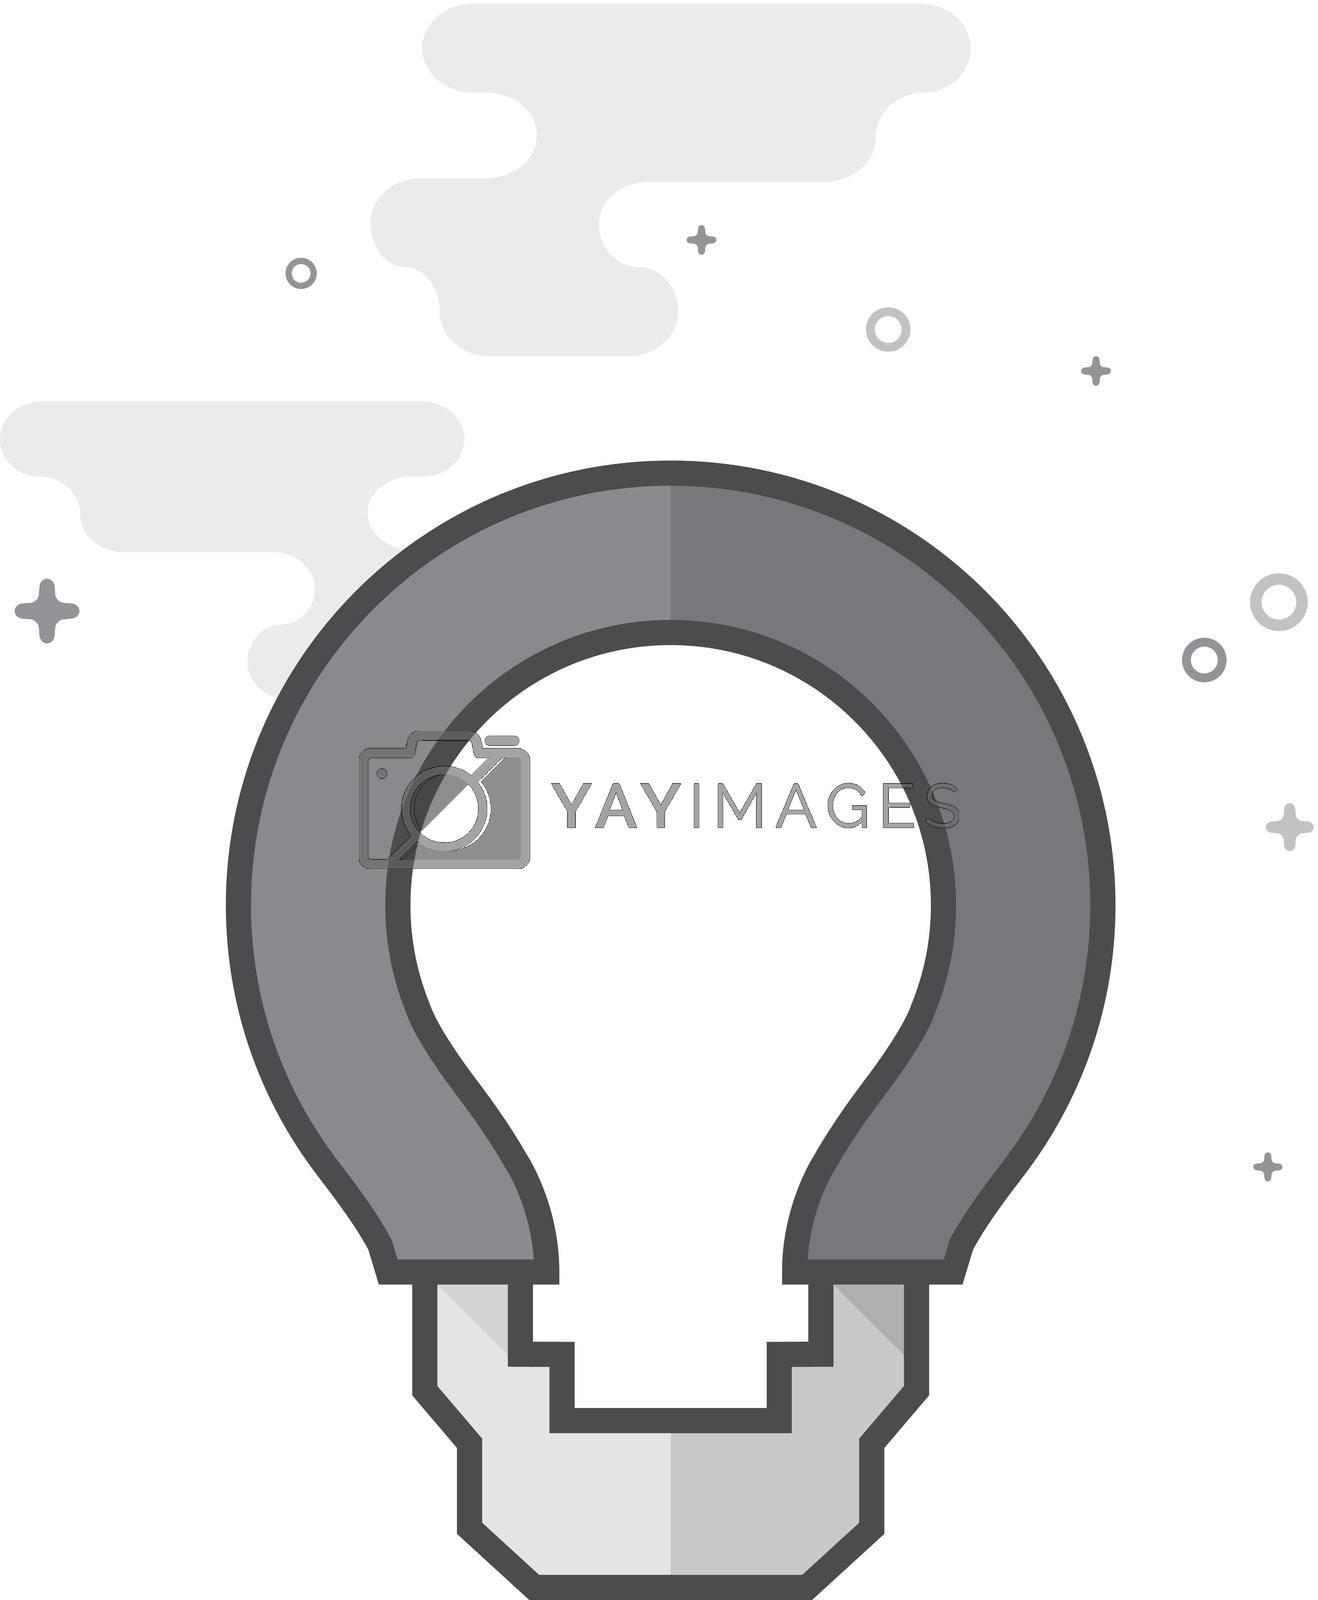 Royalty free image of Flat Grayscale Icon - Spoke tool by puruan